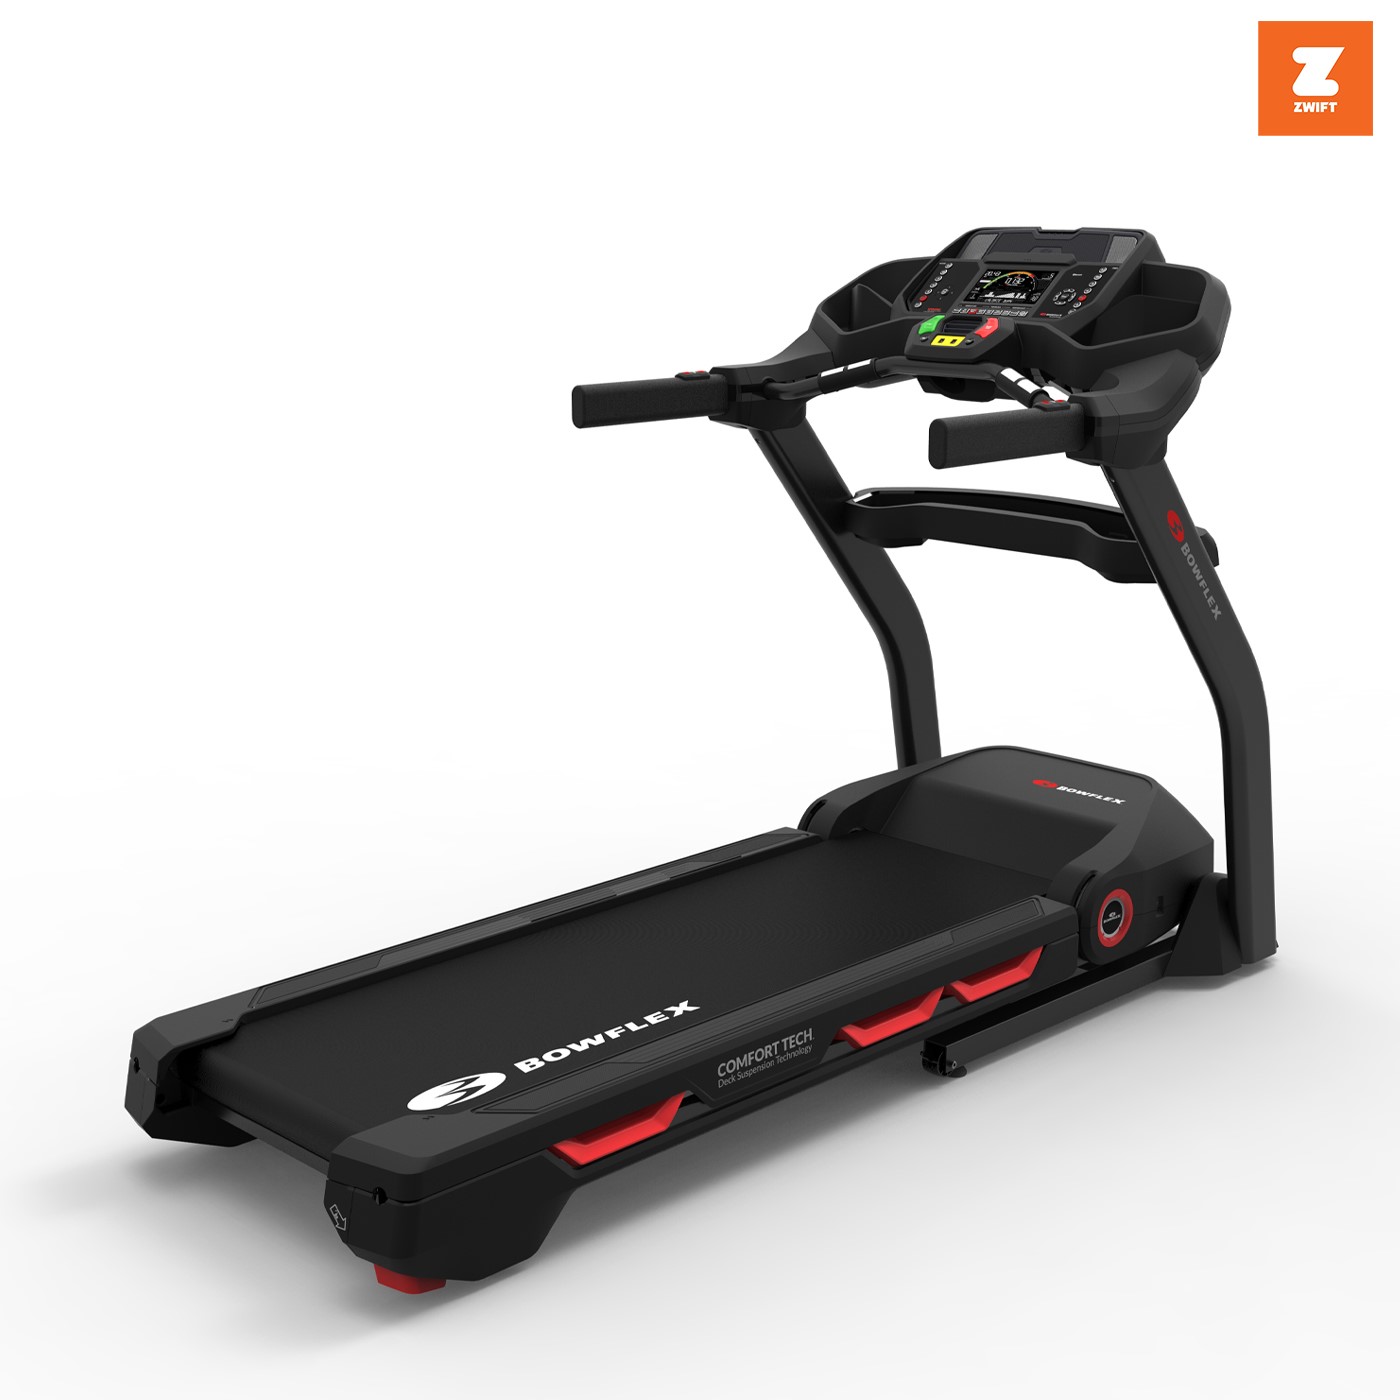 Bowflex BXT226 Results Series Loopband - Zwift Compatible met grote korting